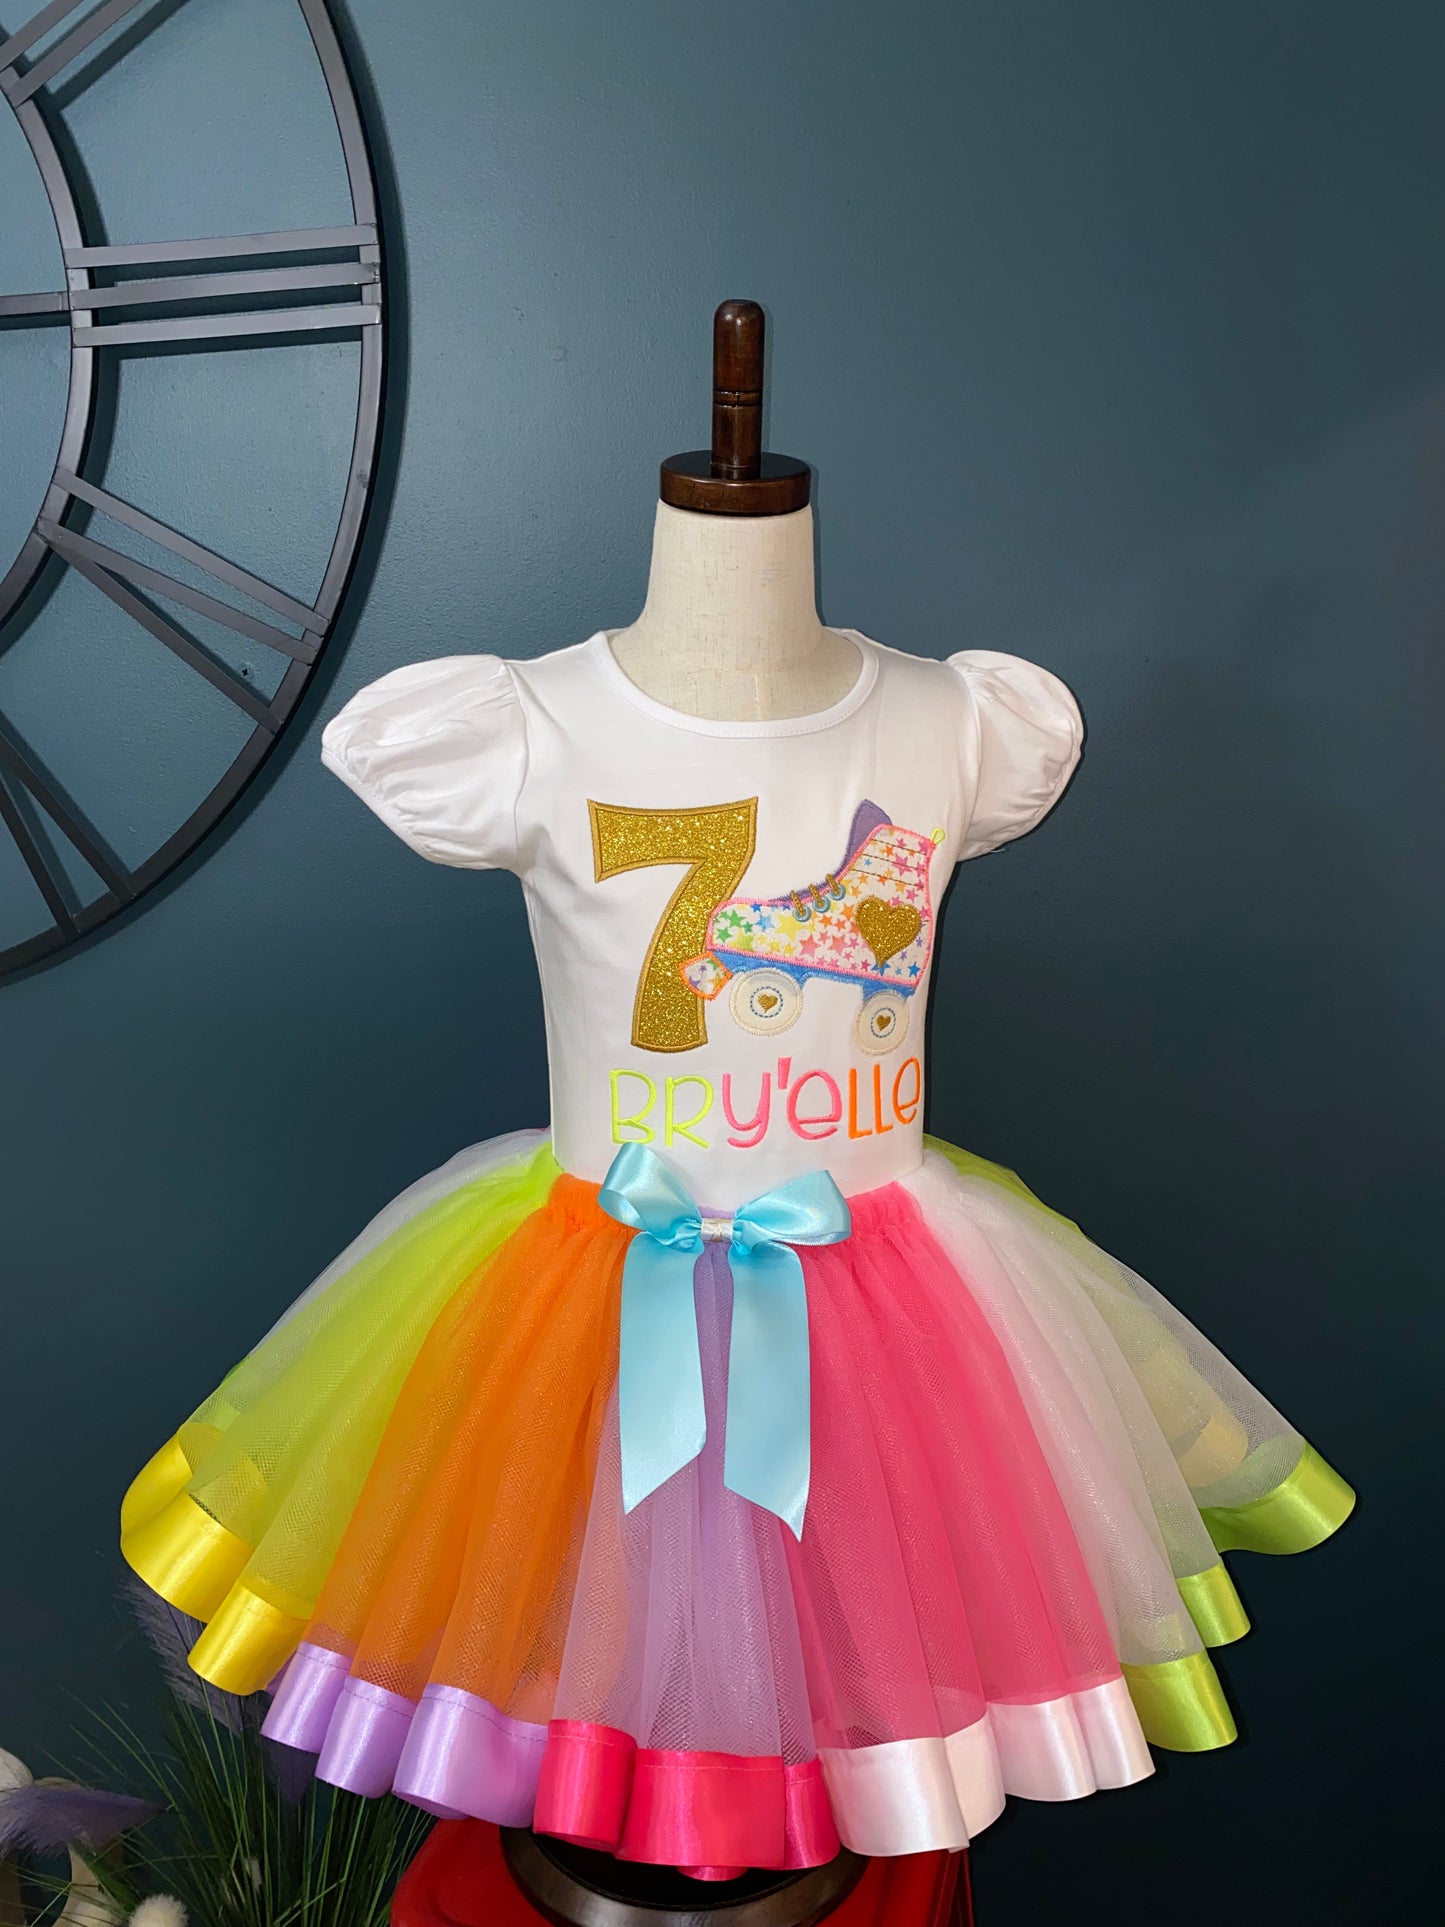 Skate theme birthday shirt and outfit for girls